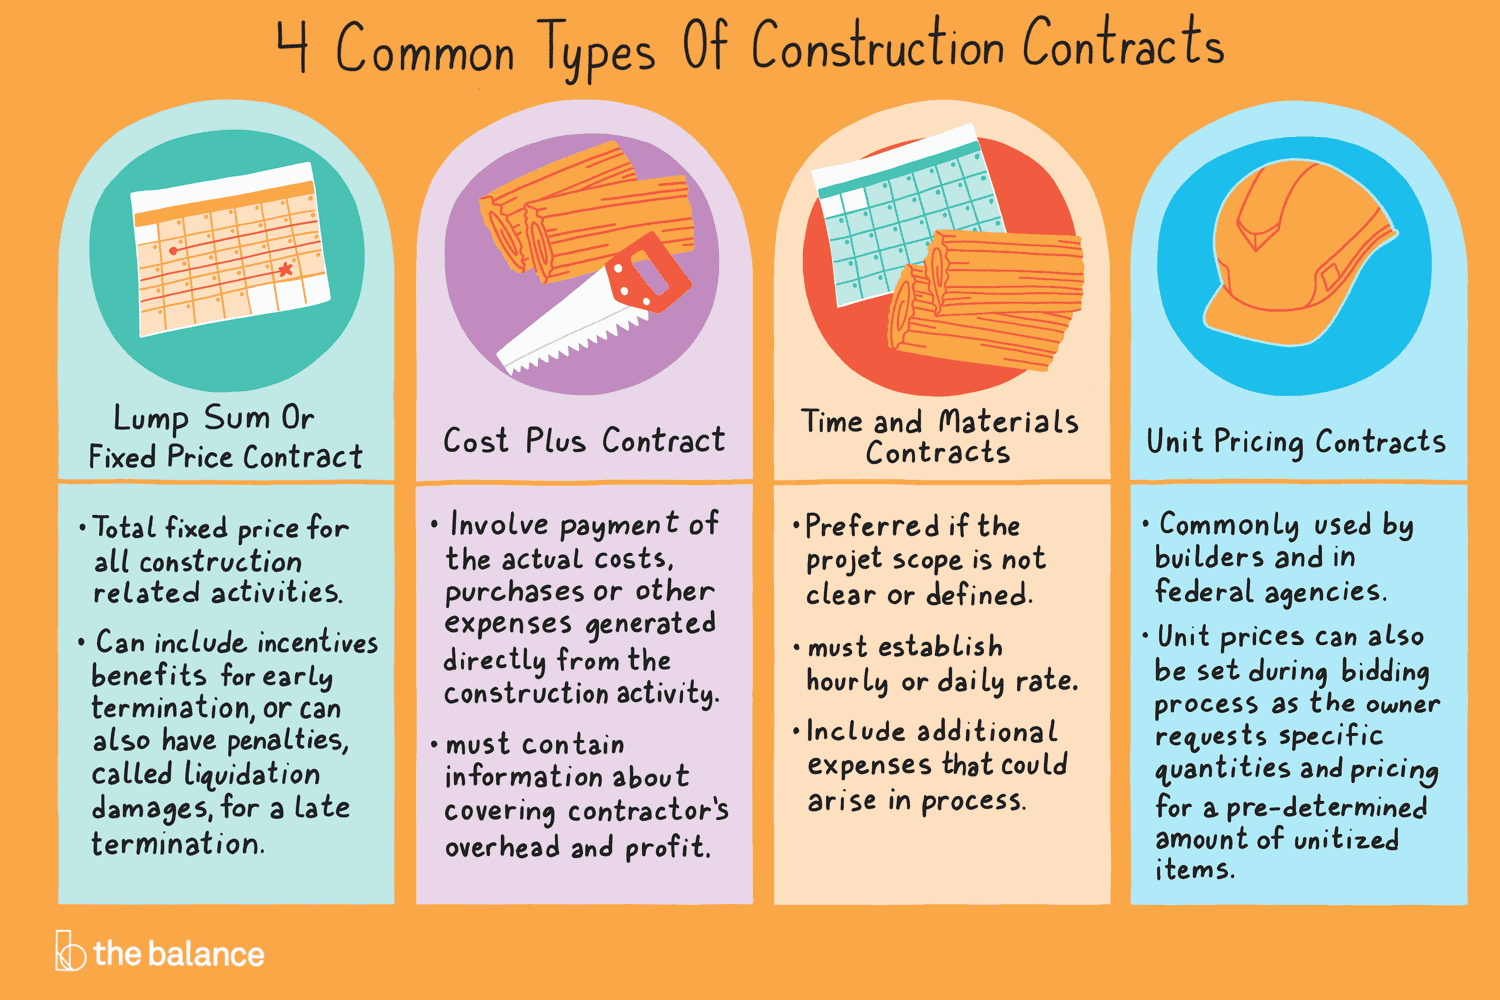 Bond Purchase Agreement Sample 4 Common Types Of Construction Contracts